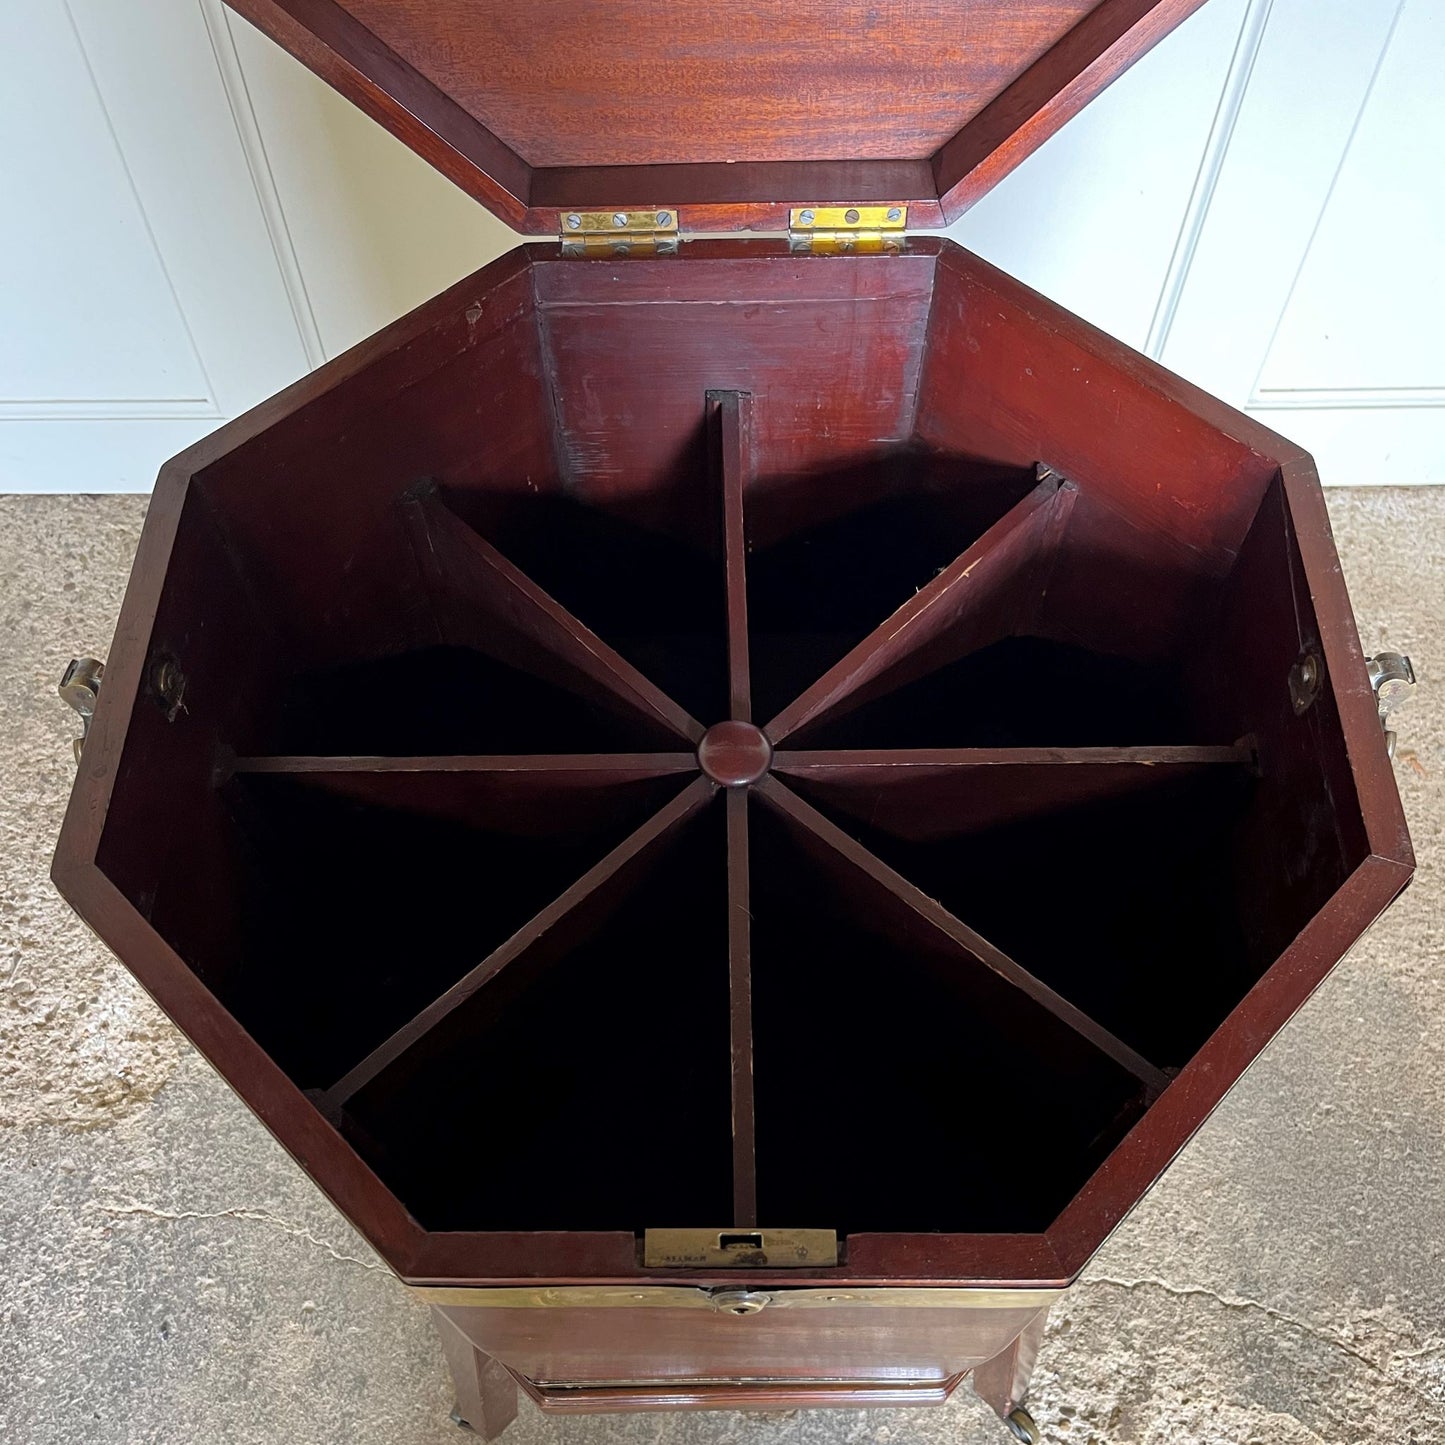 A George III mahogany octagonal brass bound wine cooler on its original stand. The hinged lid encloses an eight division interior, with brass carrying handles on the side and a fixed stand with square tapering legs on brass castors. A beautiful patina throughout. A small piece of brass trim is missing around the face of the lock, the catch of which does not completely close, leaving a gap at the front of c. 0.5cm when shut, as reflected in the price.